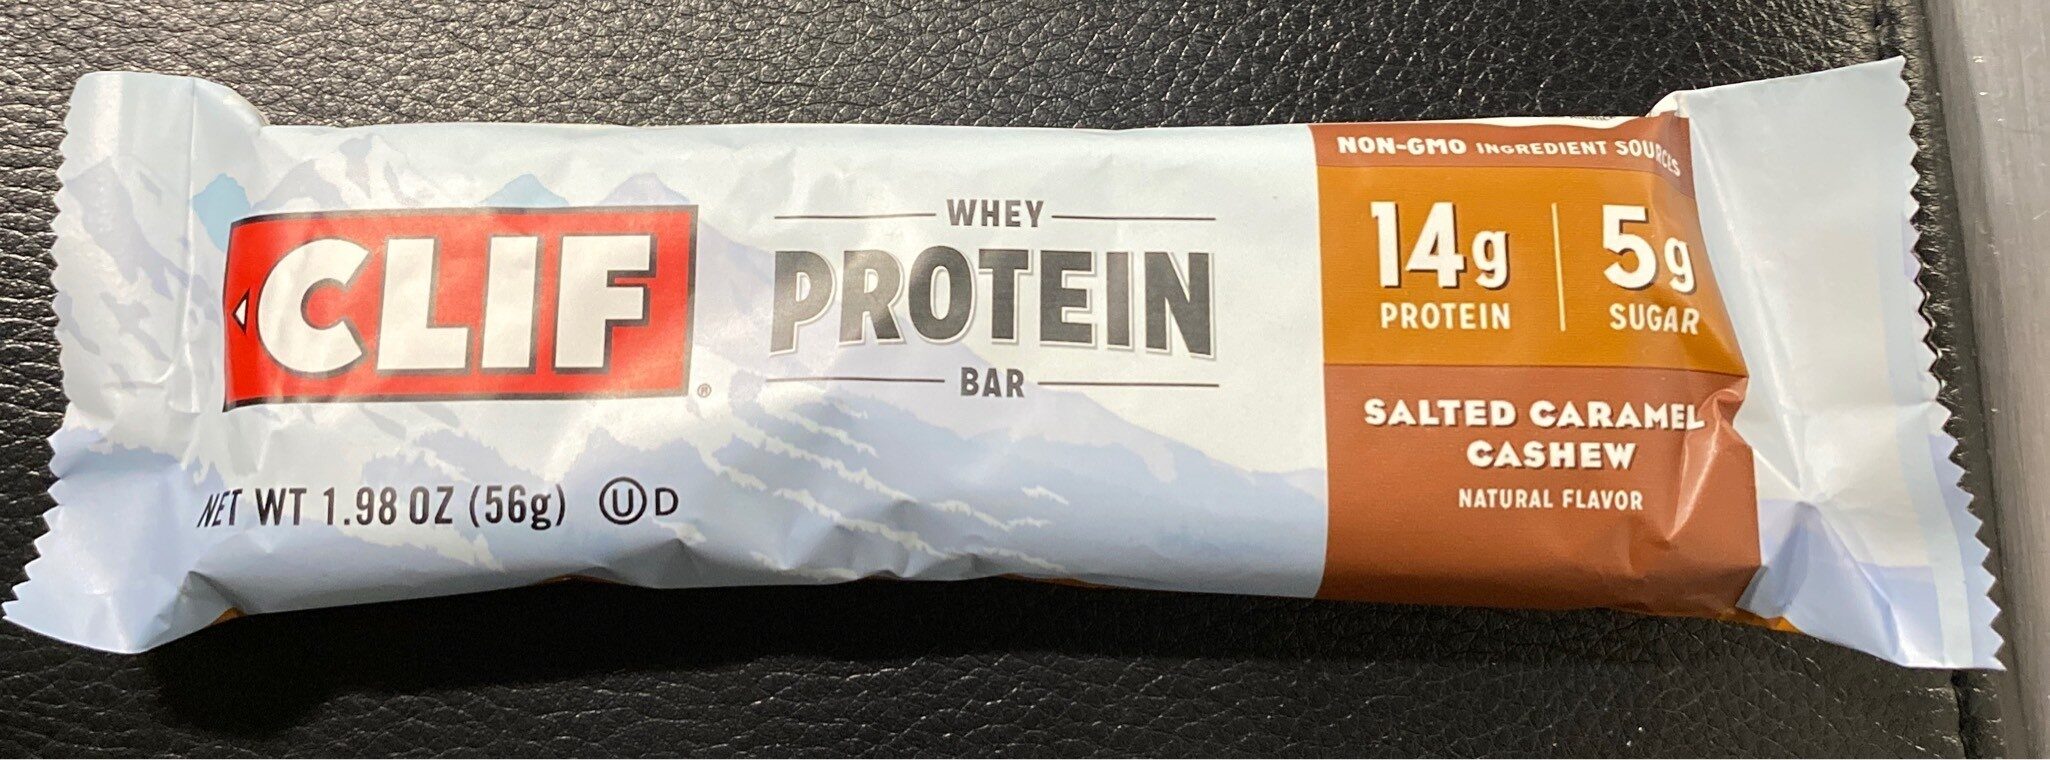 whey protein bar, salted caramel cashew - Product